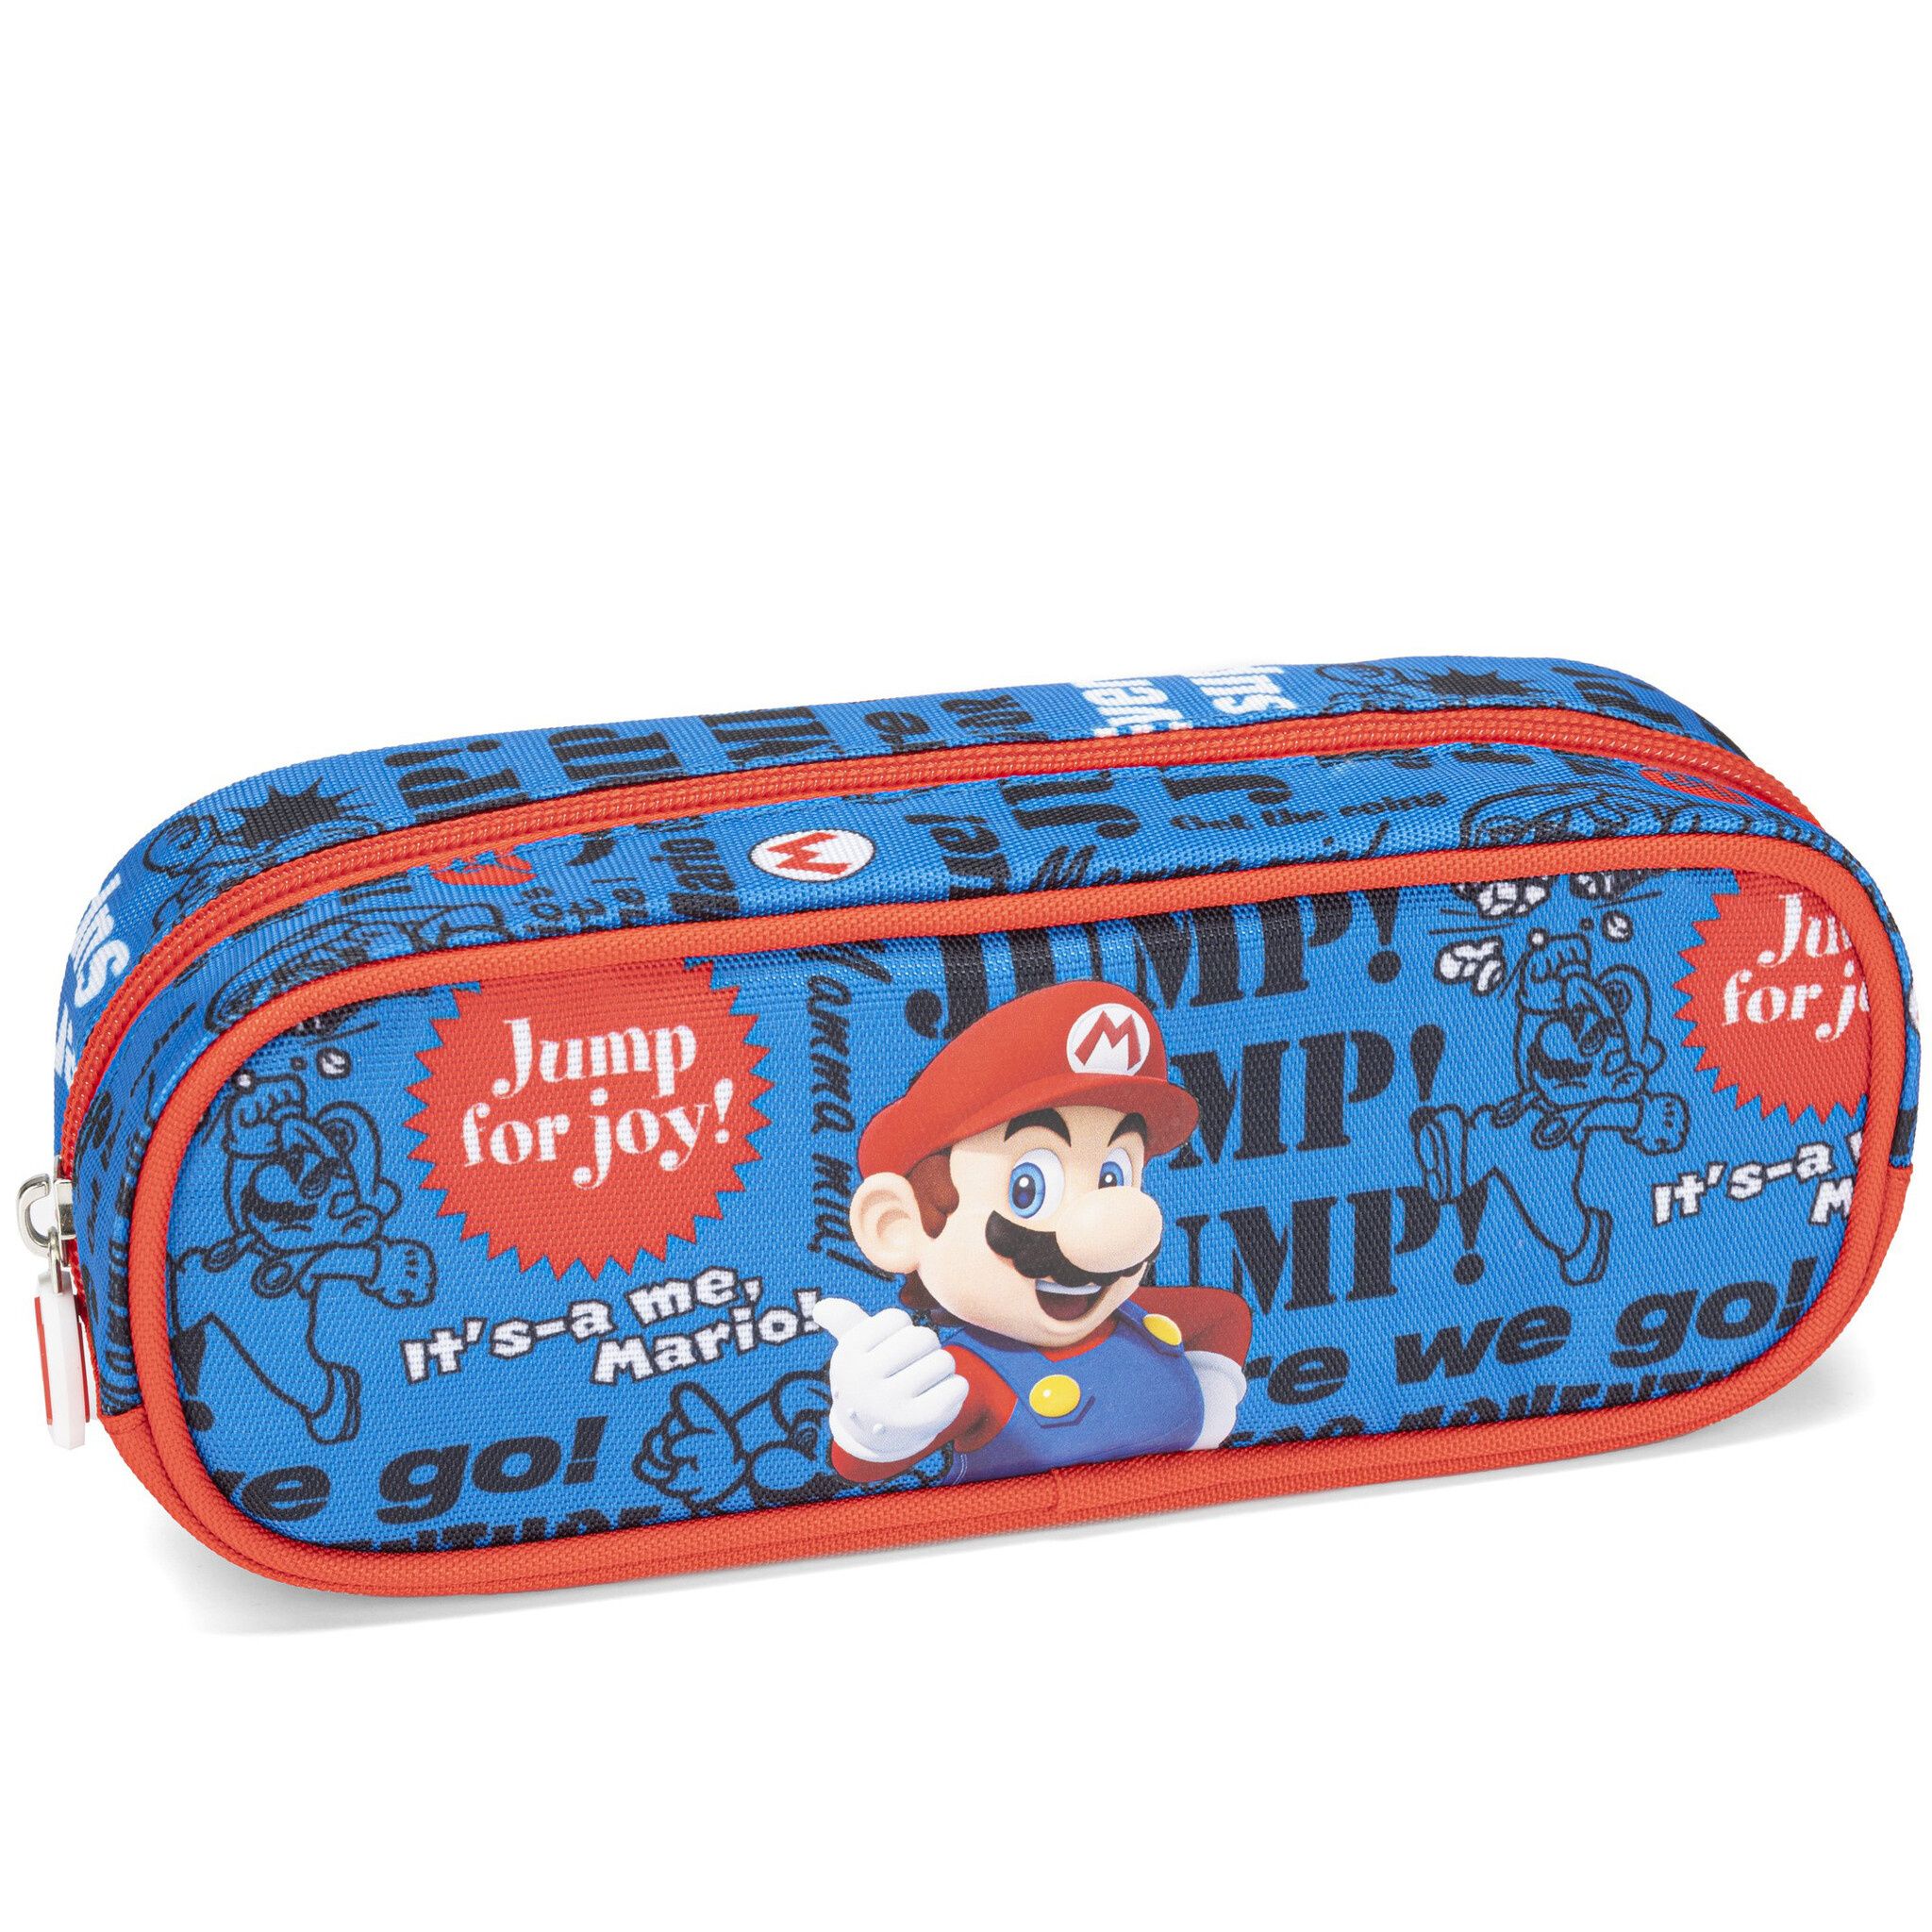 Super Mario Pouch, Here We Go! - 22 x 7 x 8cm - Polyester